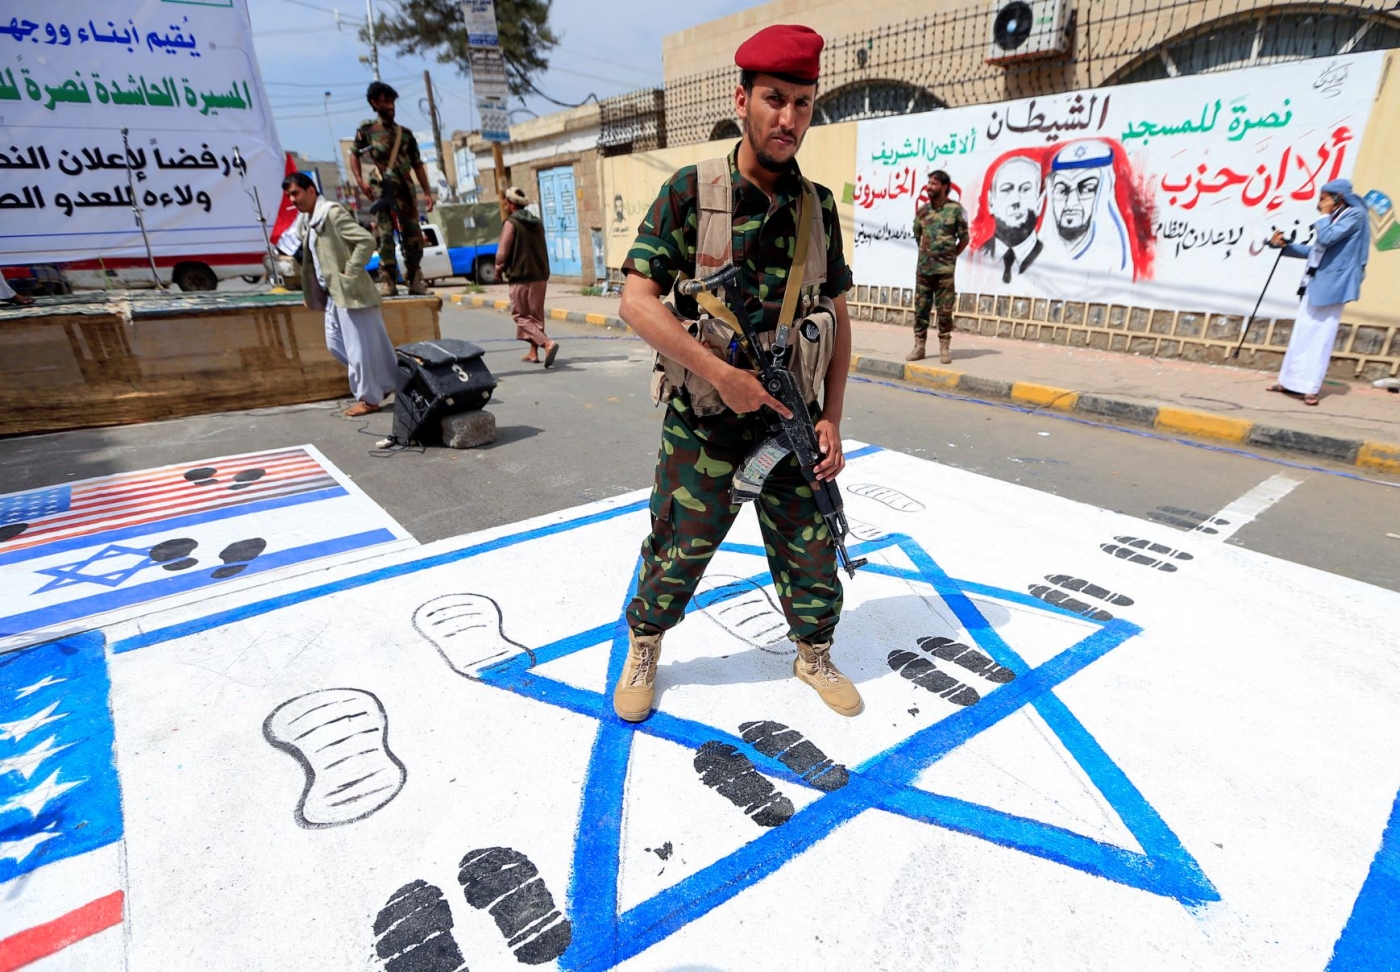 A fighter loyal to Yemen's Huthi rebels treads on US and Israeli flags painted on the ground during a rally in the capital Sanaa, on August 22, 2020 (AFP)